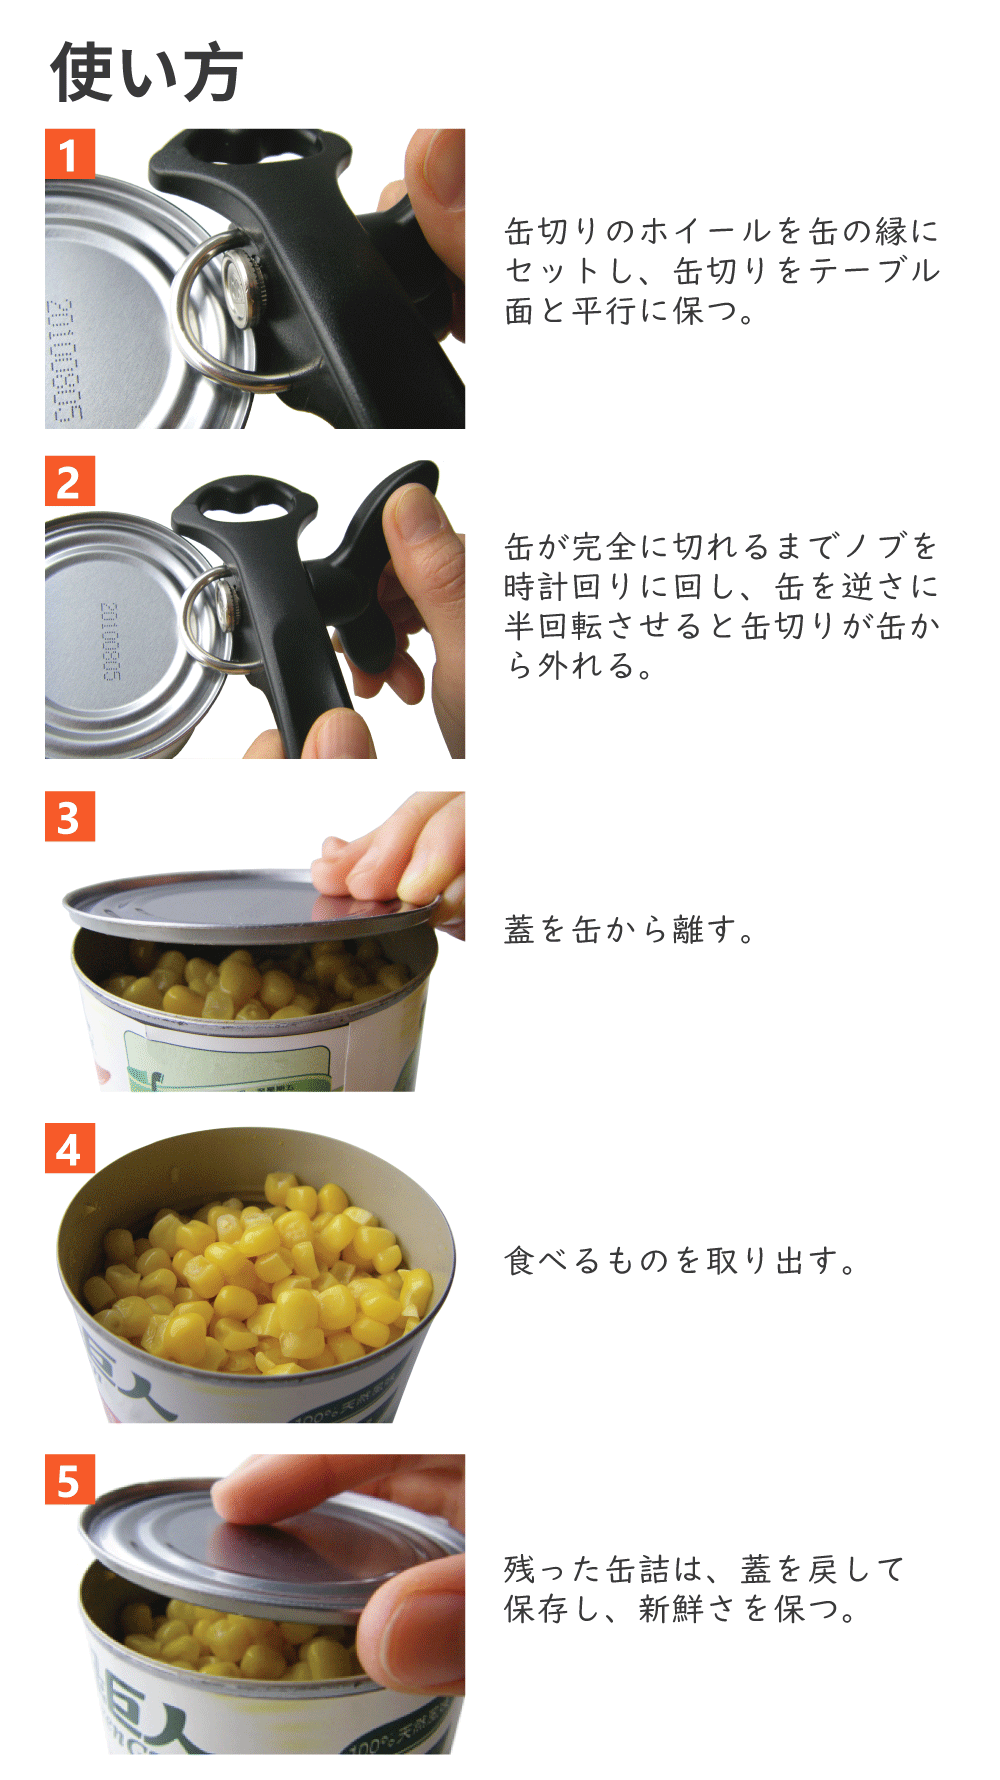 How to use safety can opener